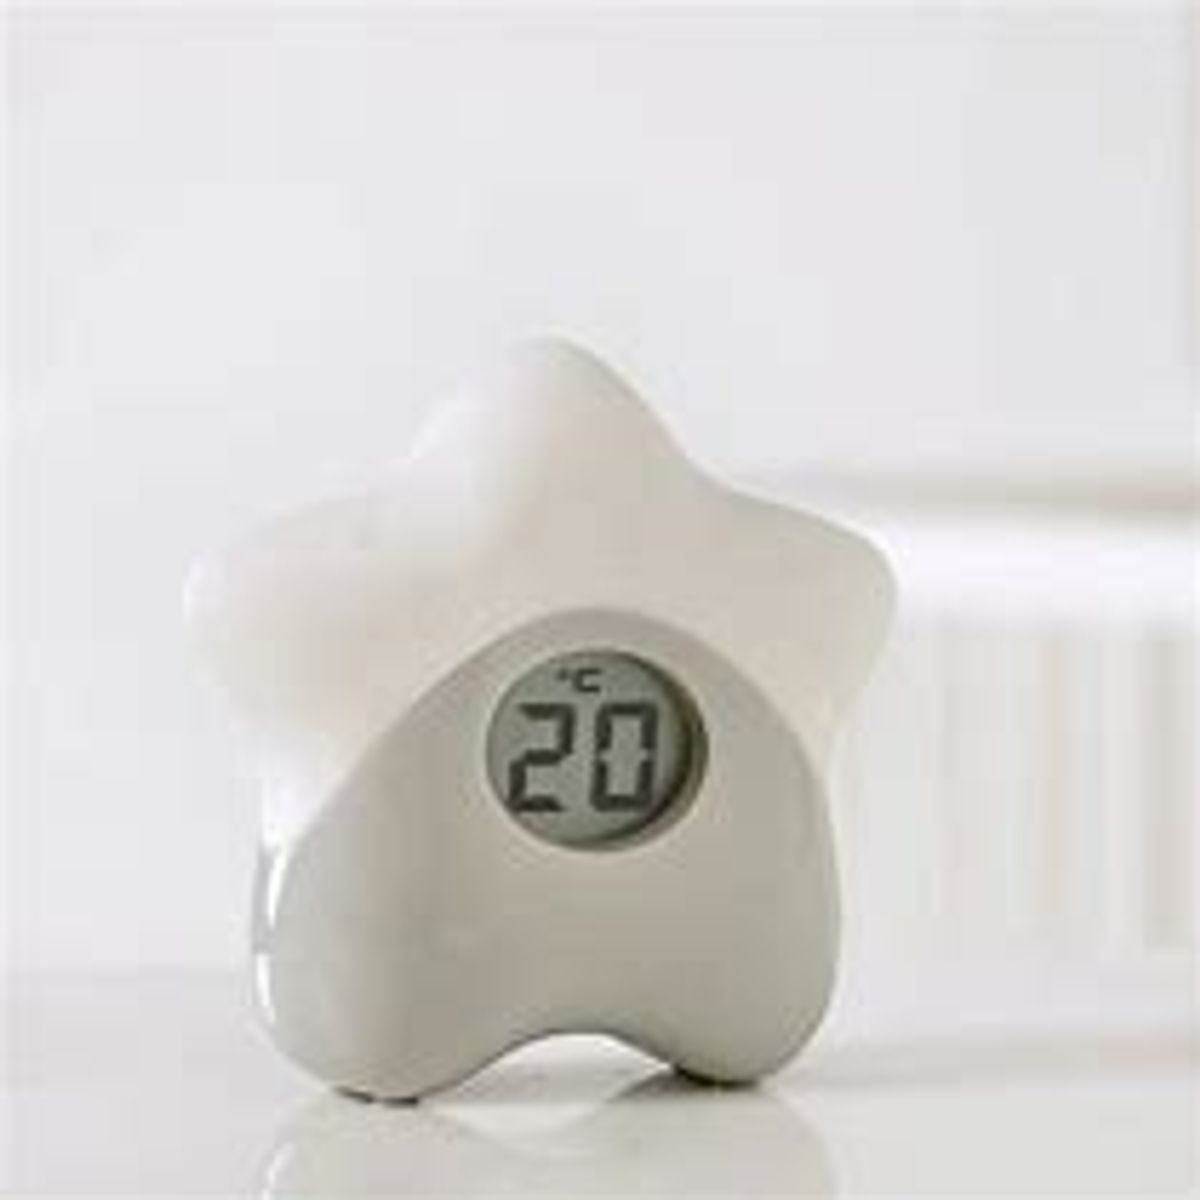 Baby room thermometers